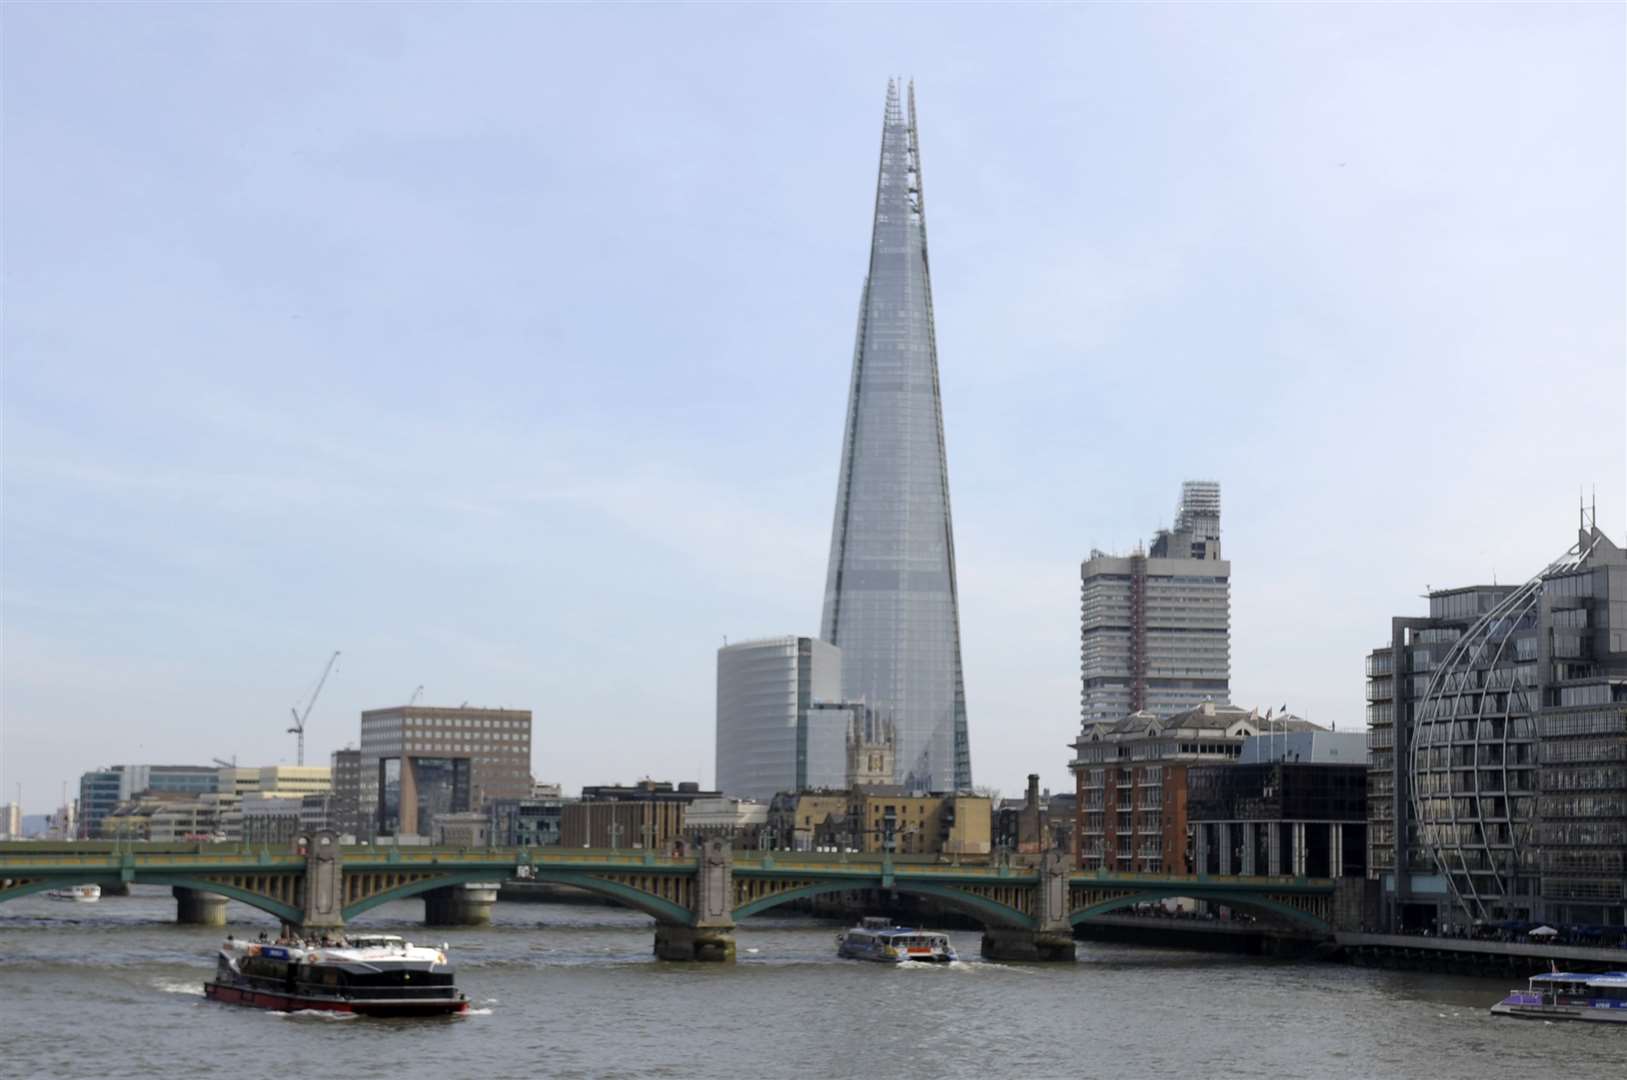 The Shard in London is Europe's tallest building